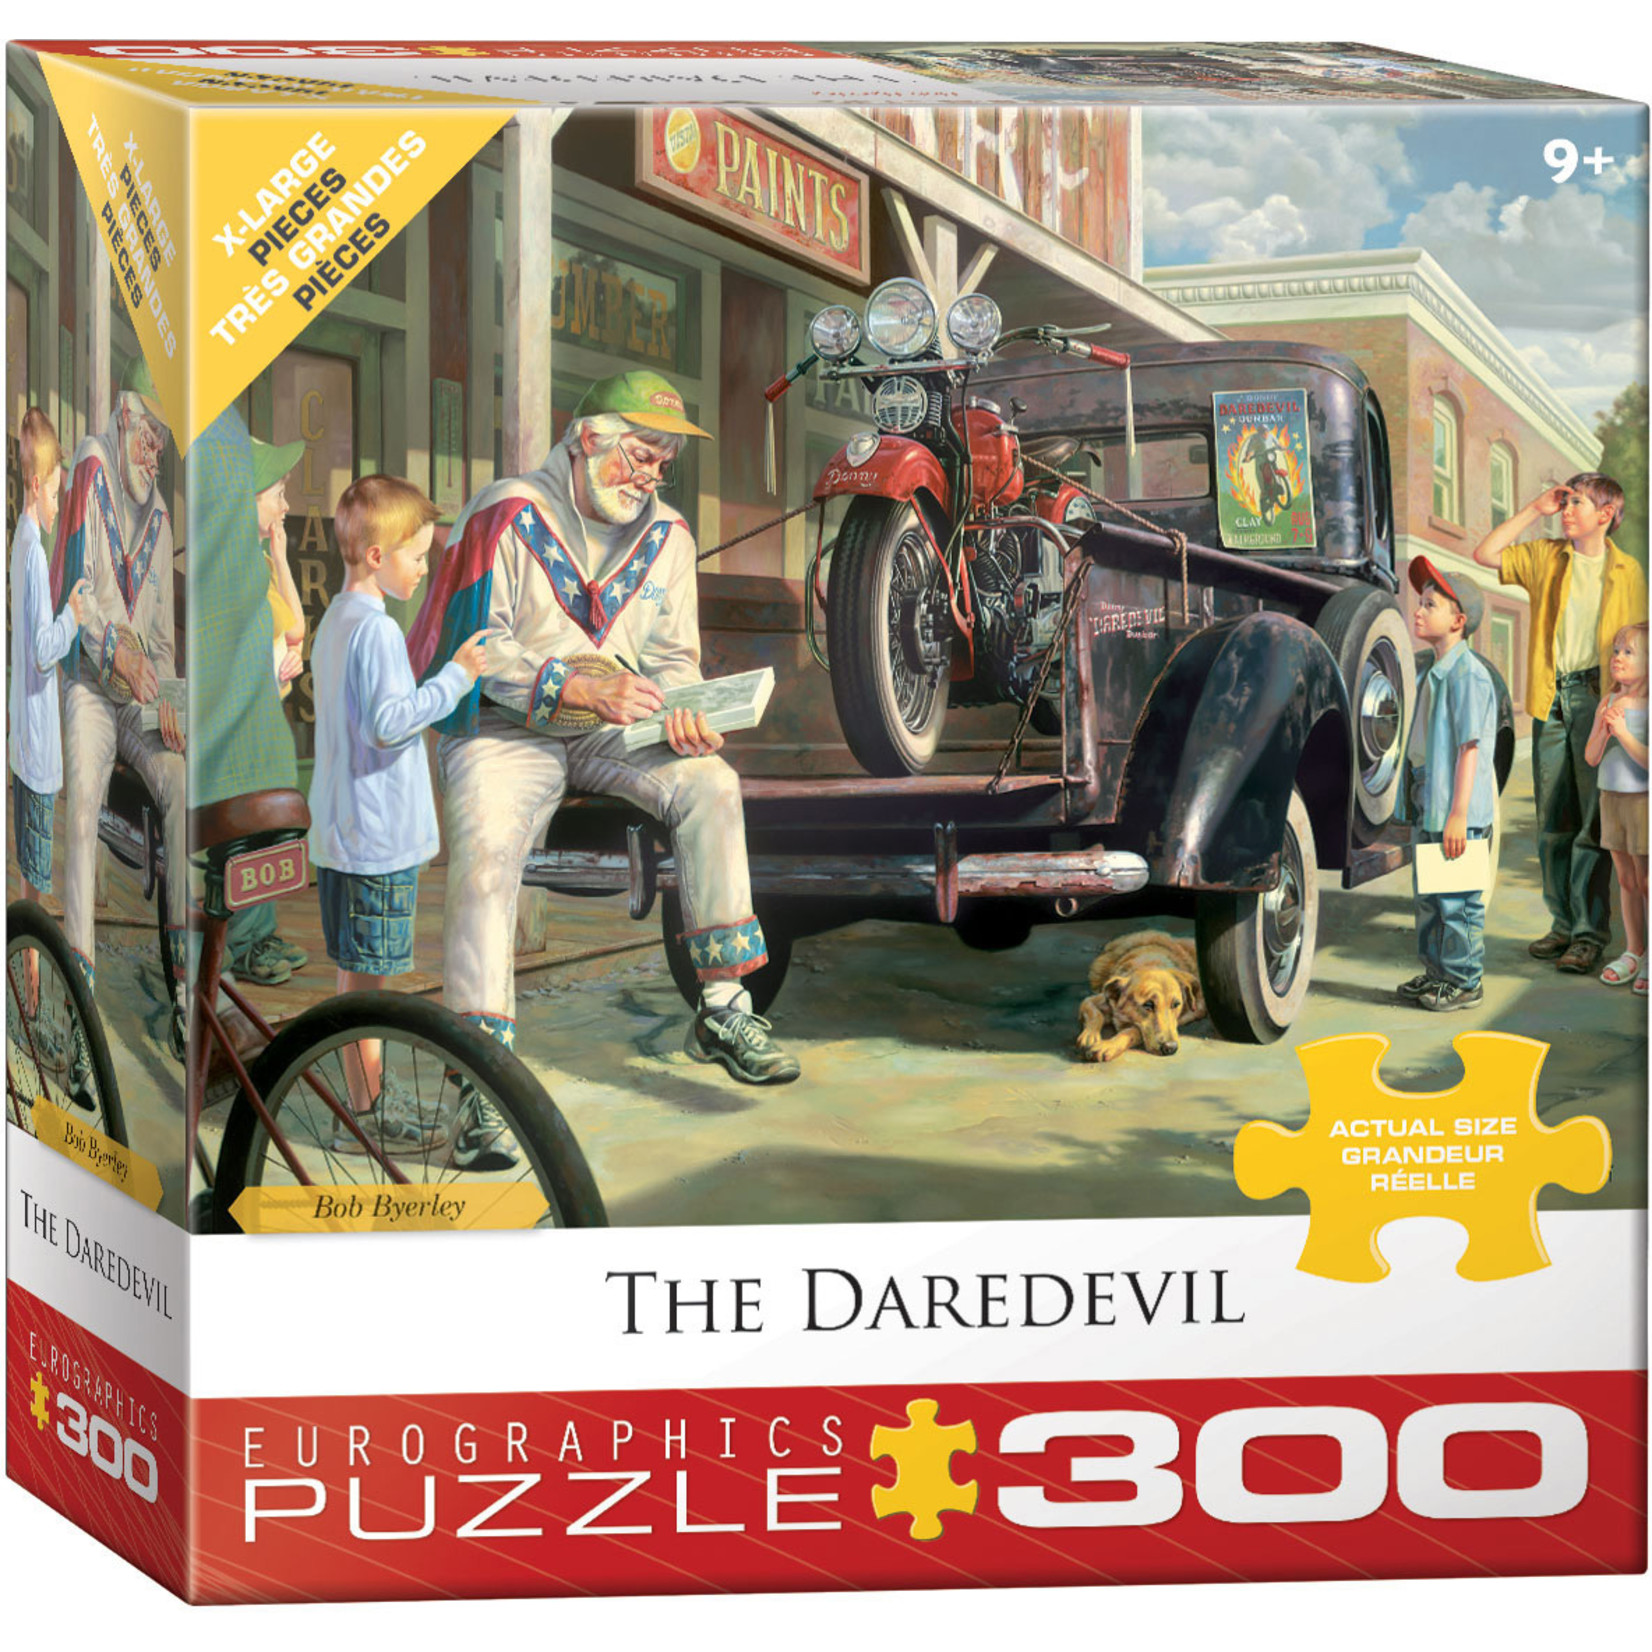 EuroGraphics Puzzles The Daredevil by Bob Byerley 300pc